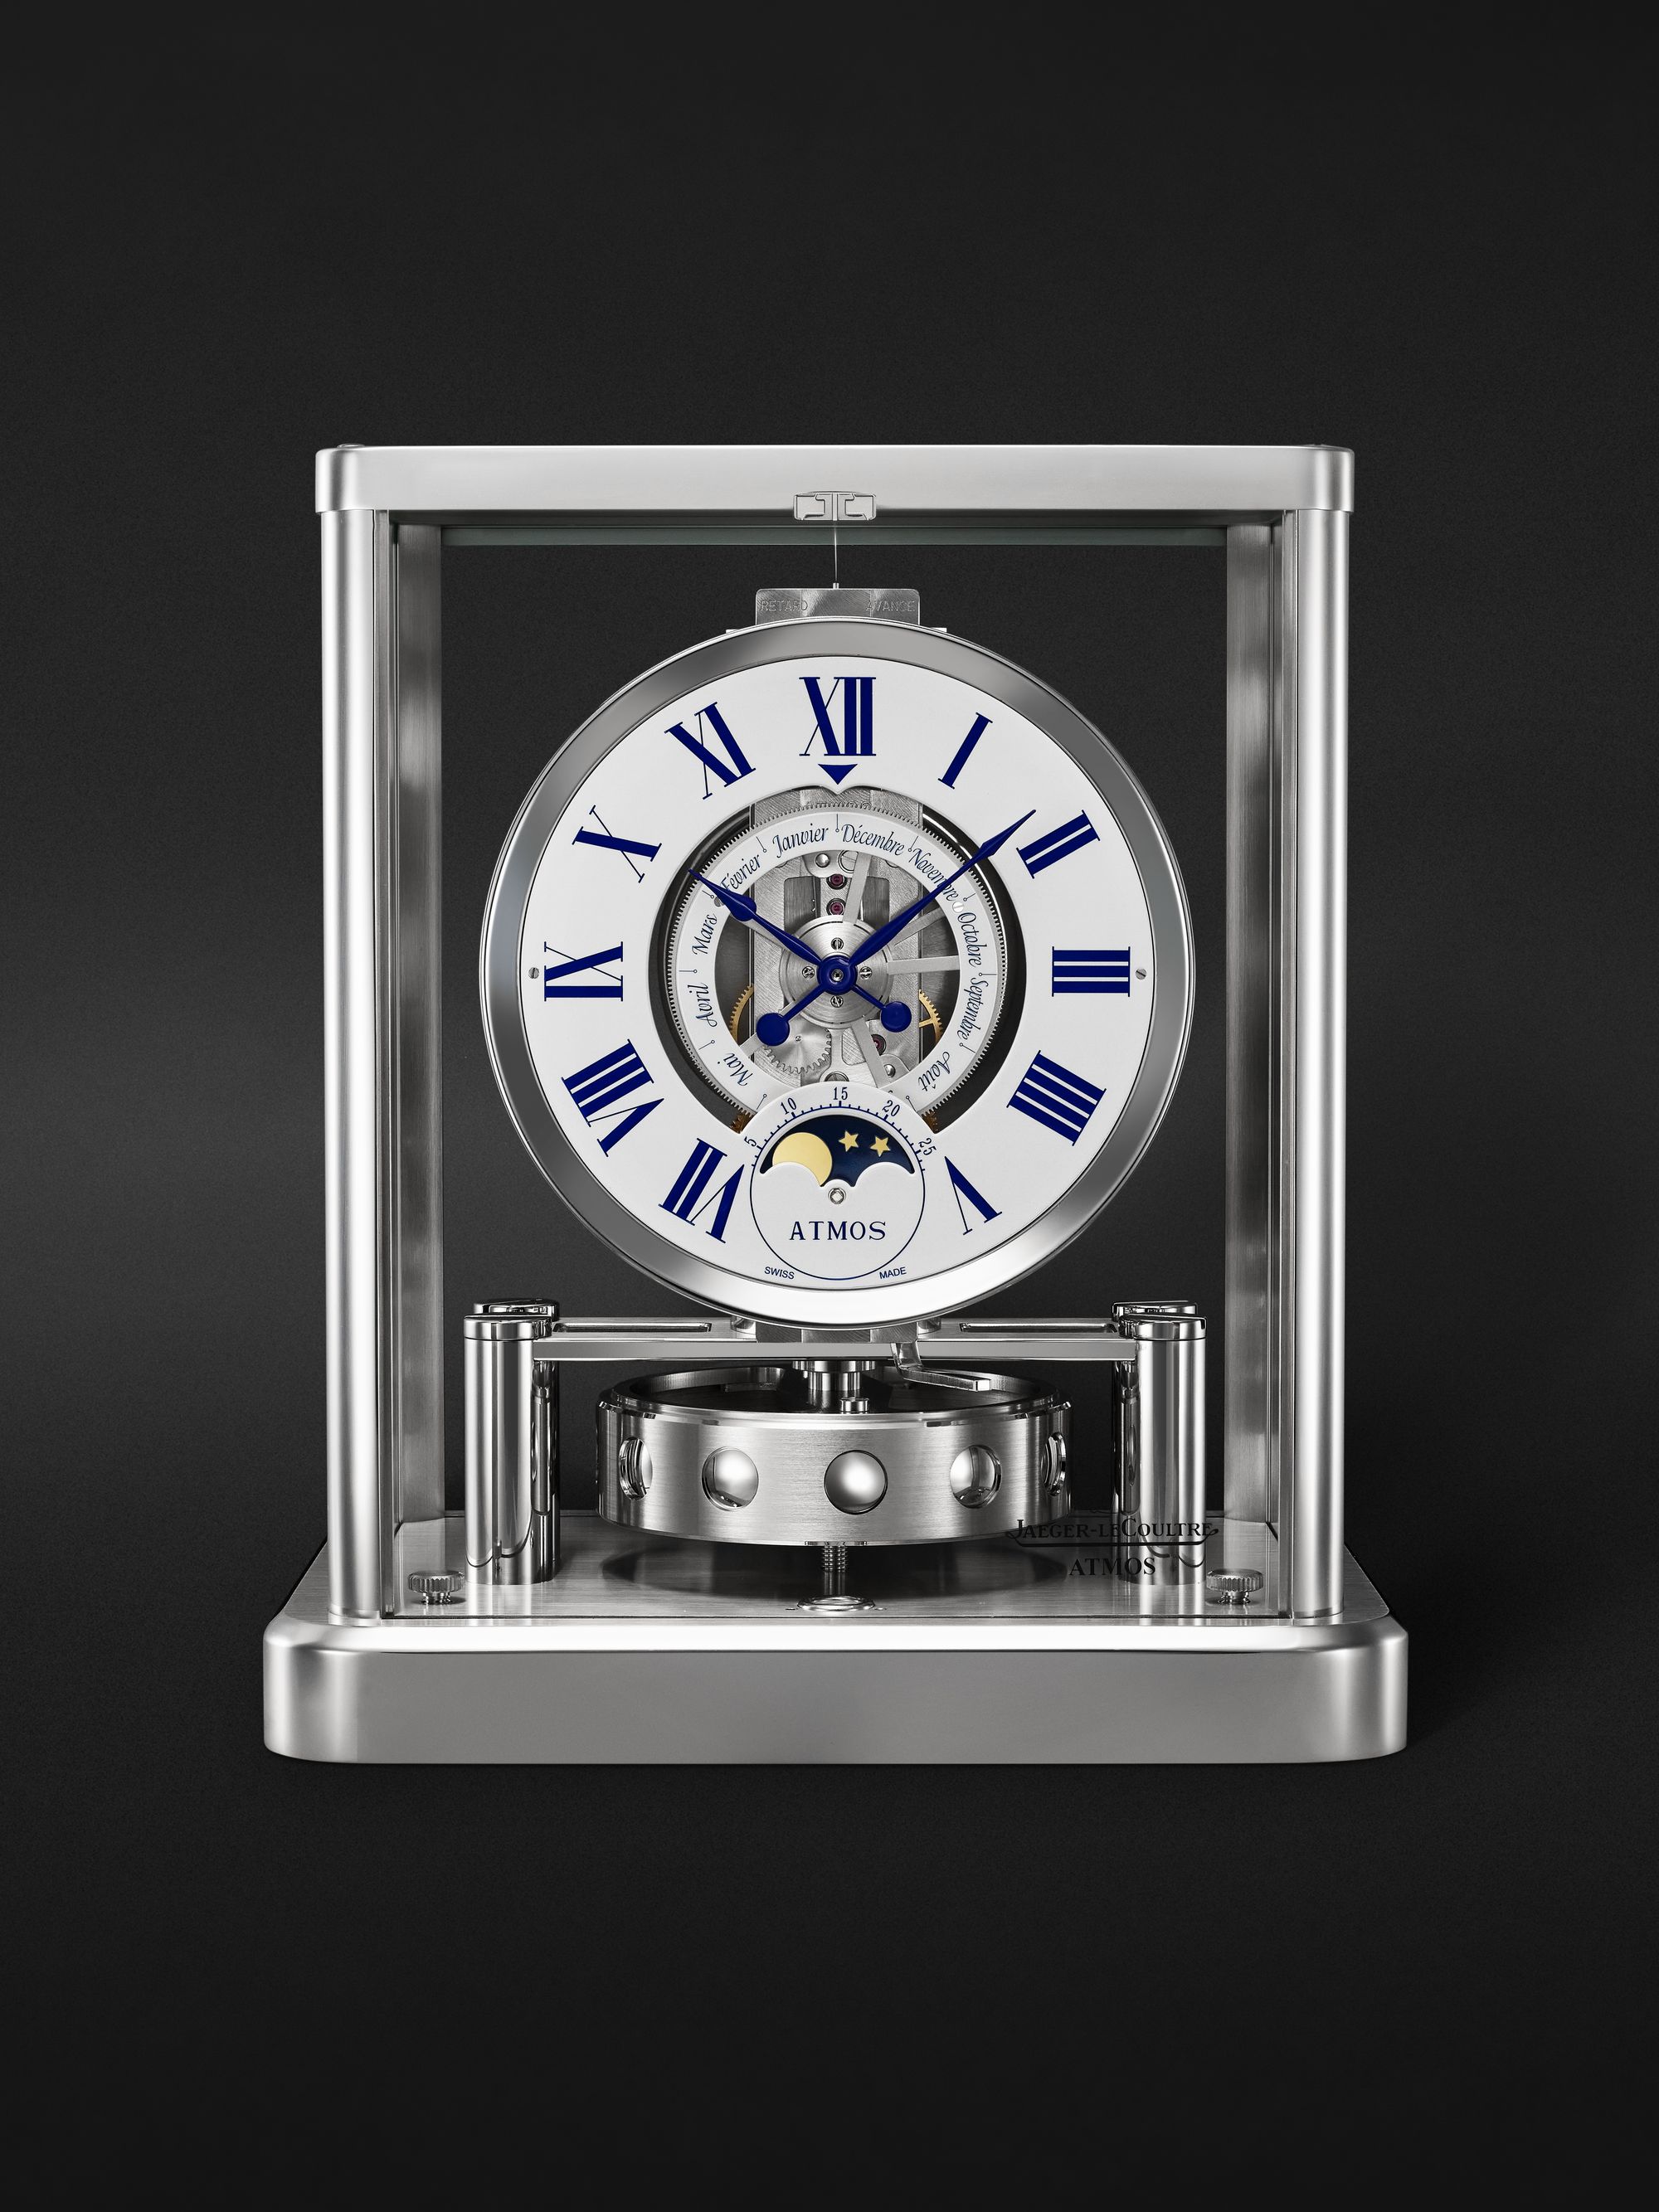 JAEGER-LECOULTRE Atmos Classique Phases de Lune Perpetual Automatic Rhodium-Plated Table Clock, Ref. No. JLQ5112202